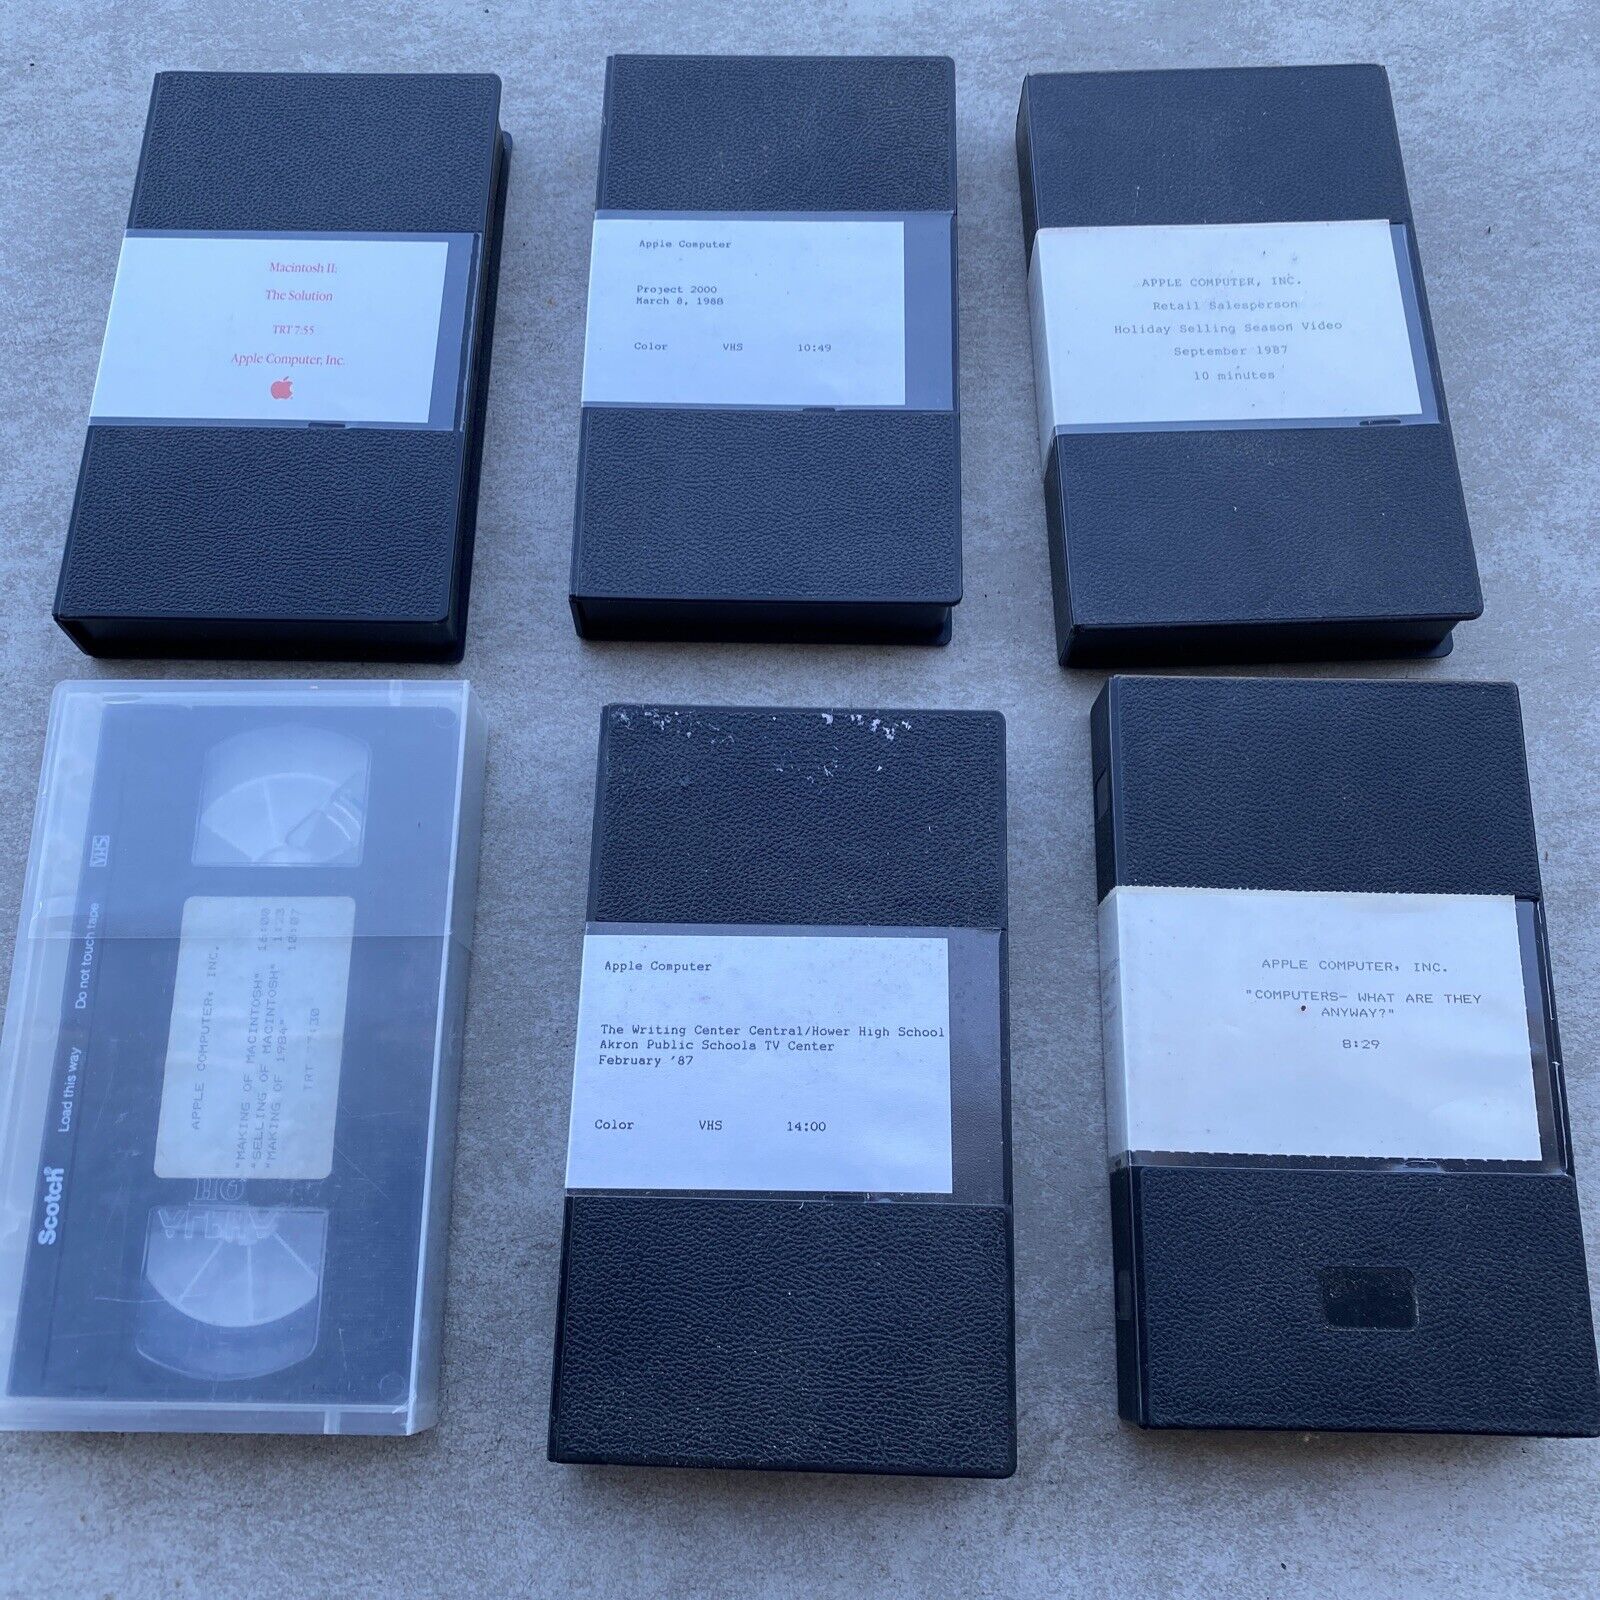 🔥 Very RARE Vintage APPLE Computer Demo and Sales Training Tapes, 1980s - WOW